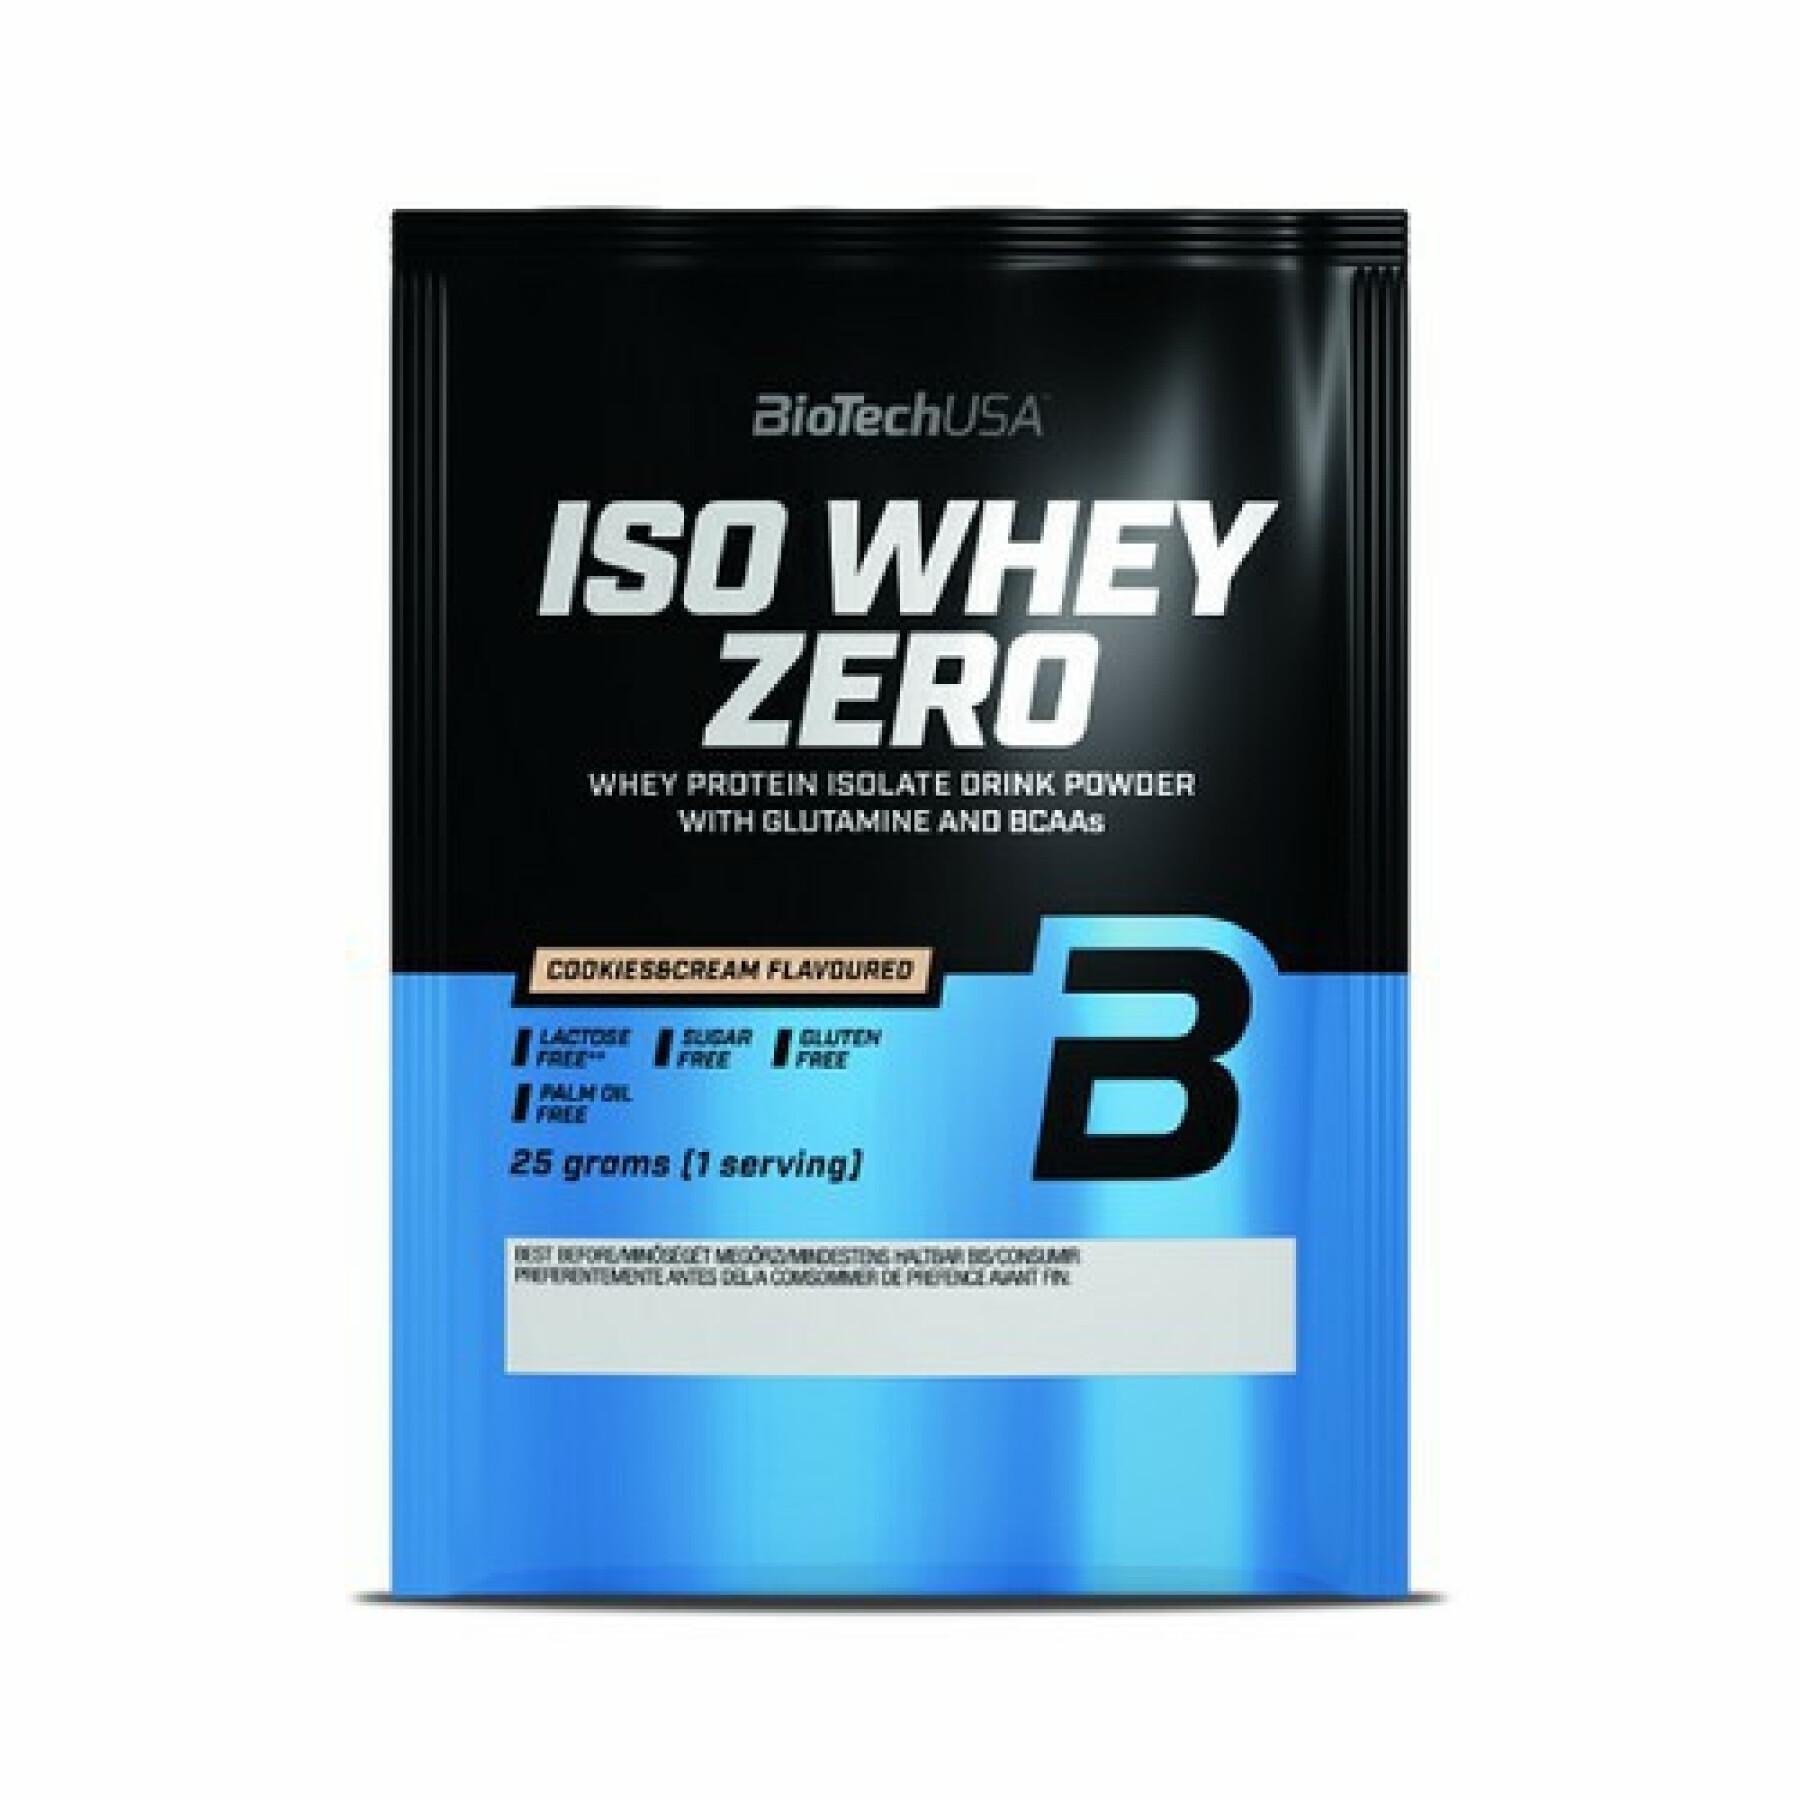 50 packets of lactose-free protein Biotech USA iso whey zero - Cookies & cream - 25g